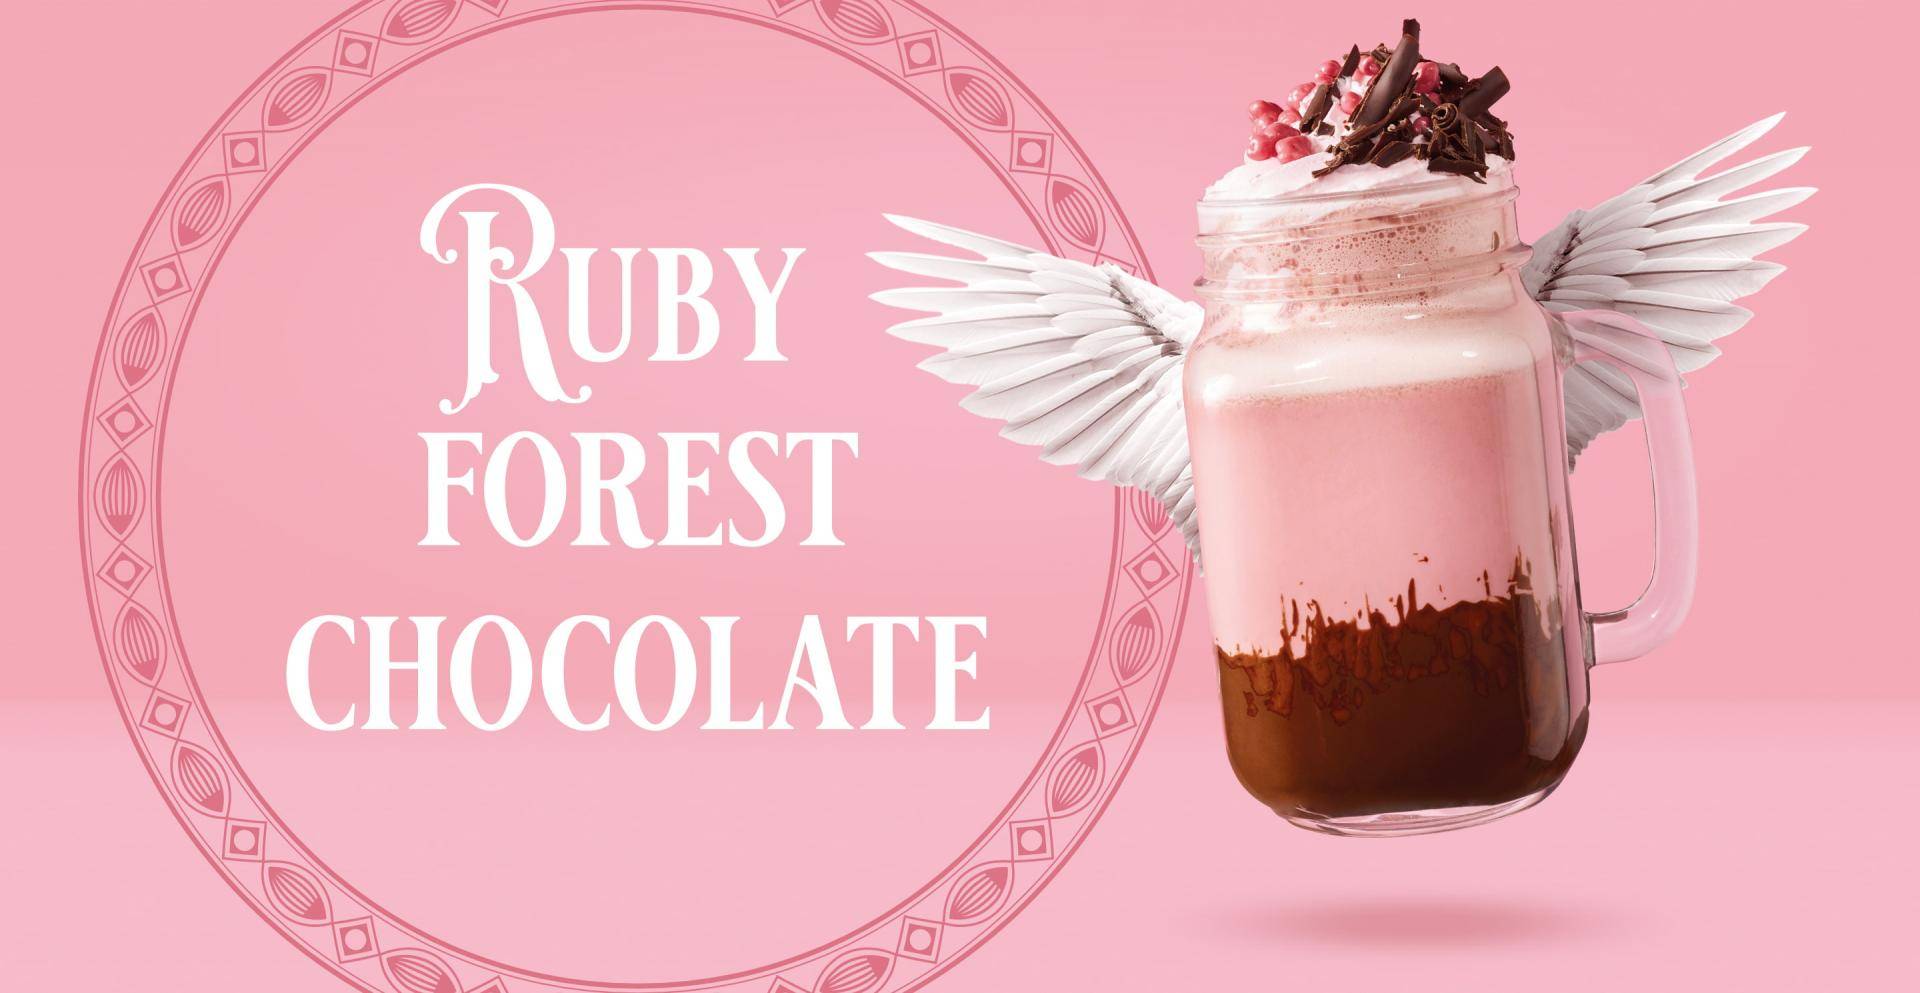 Ruby Launch website recipes forest chocolate drink